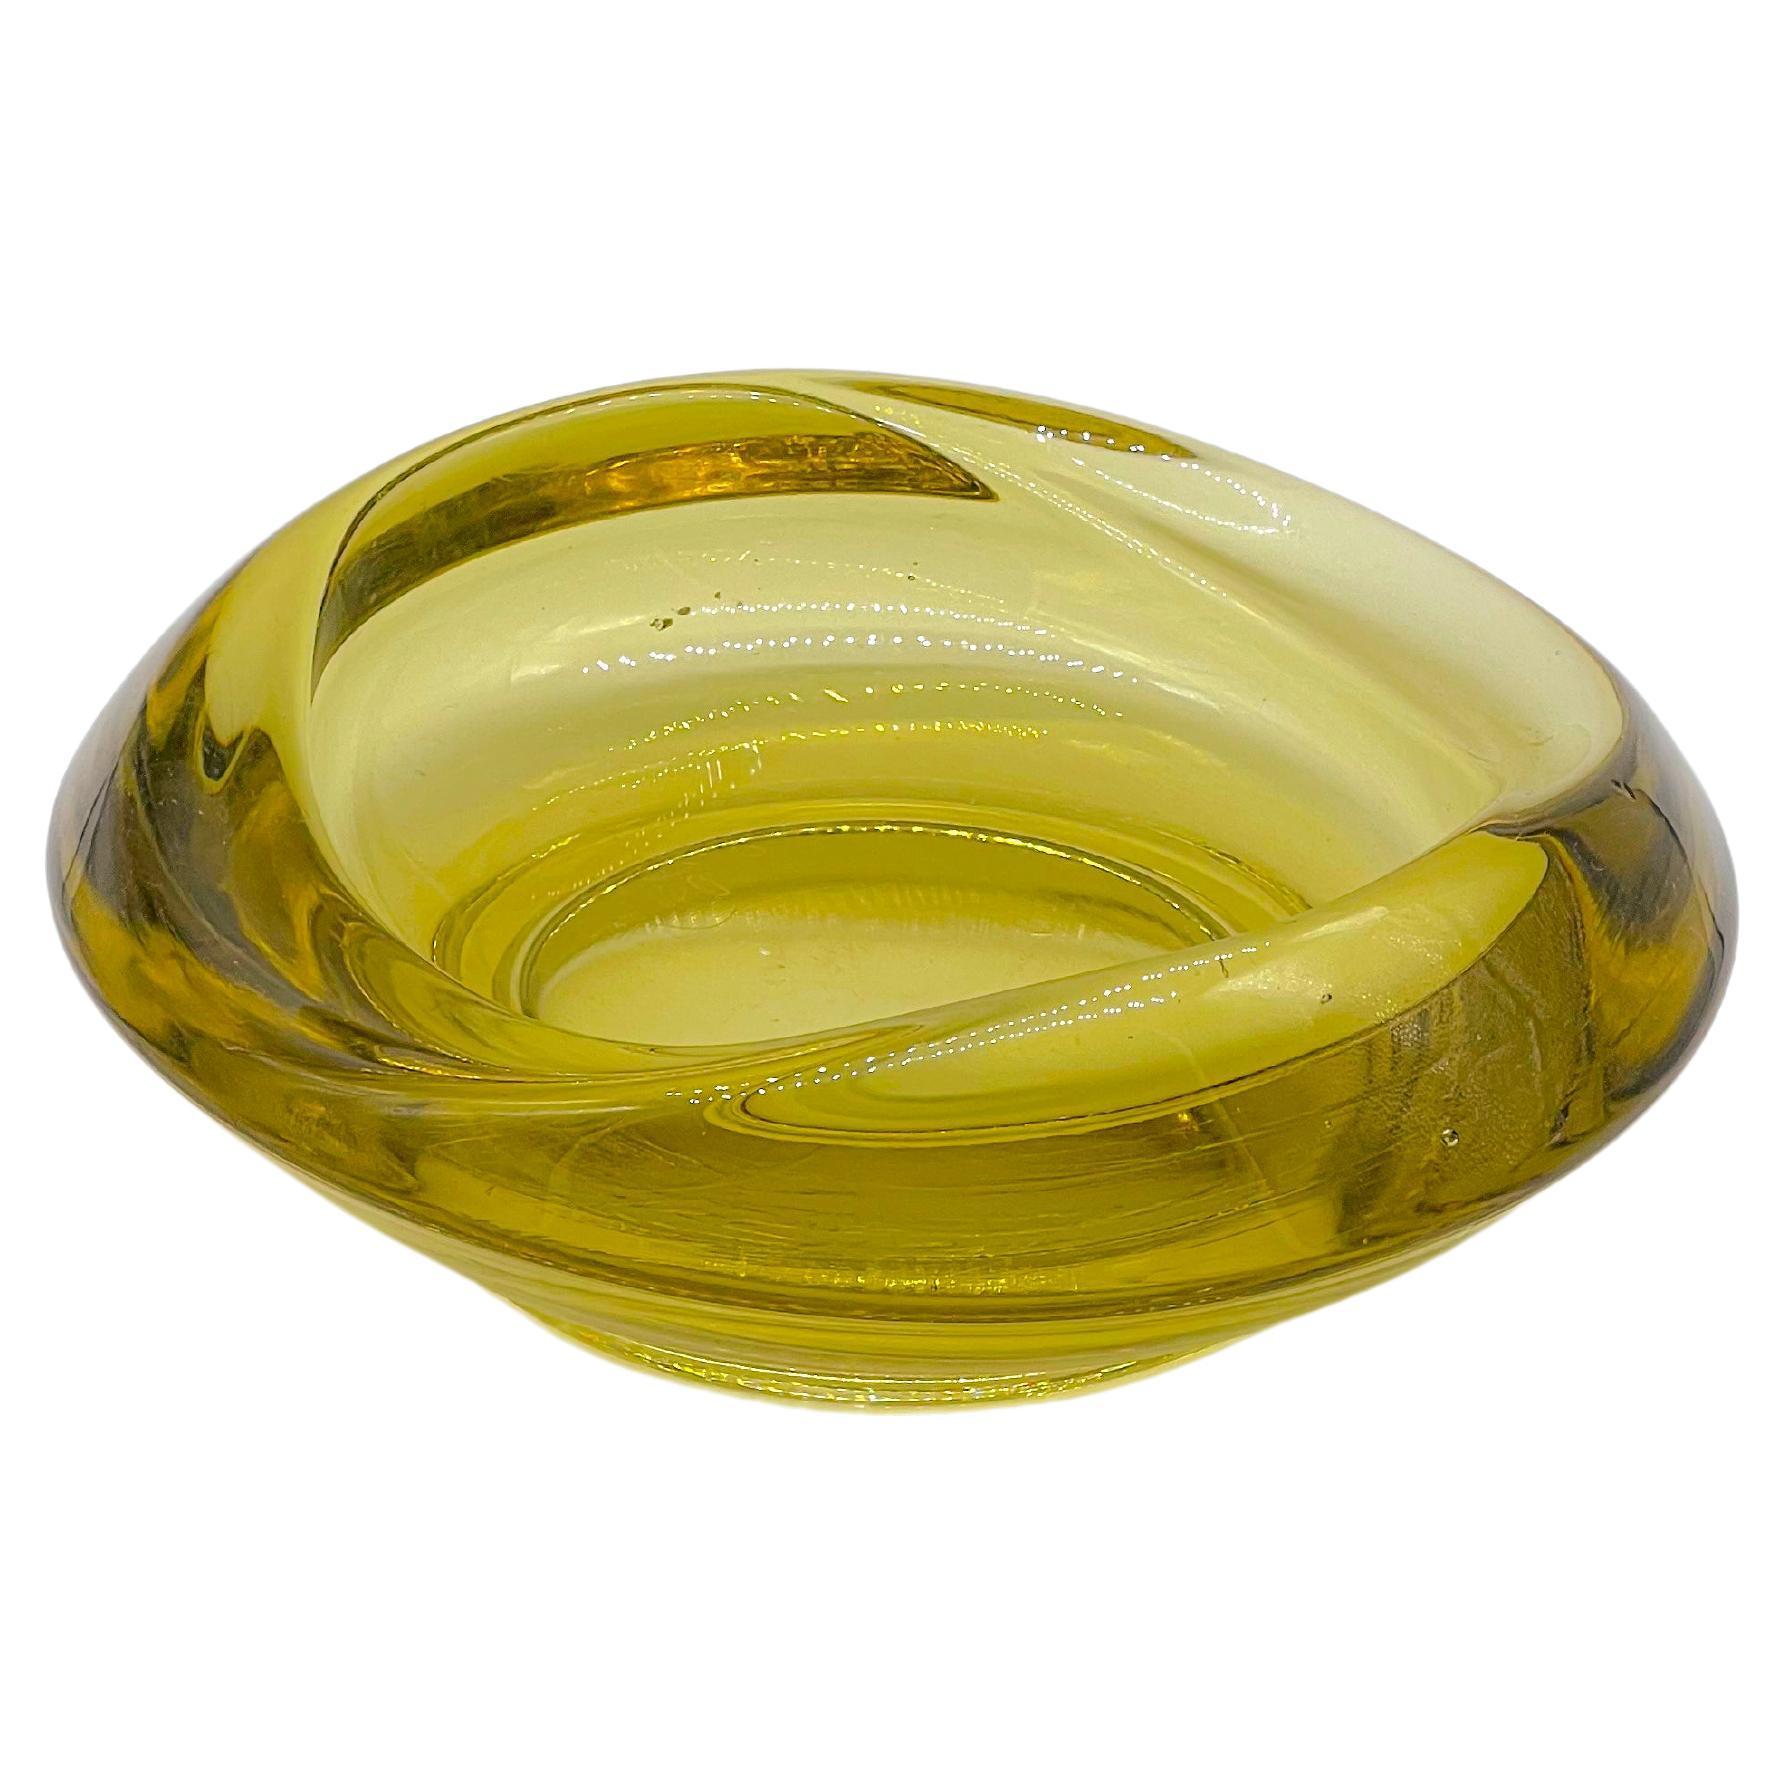 Mid-Century Modern decorative bowl / vide poche in yellow Murano glass, beautiful hue of color and timeless shape. Perfect for an entryway as a valet tray, or as an accent on sideboards, coffee tables, bookshelves...

It's very well preserved, with